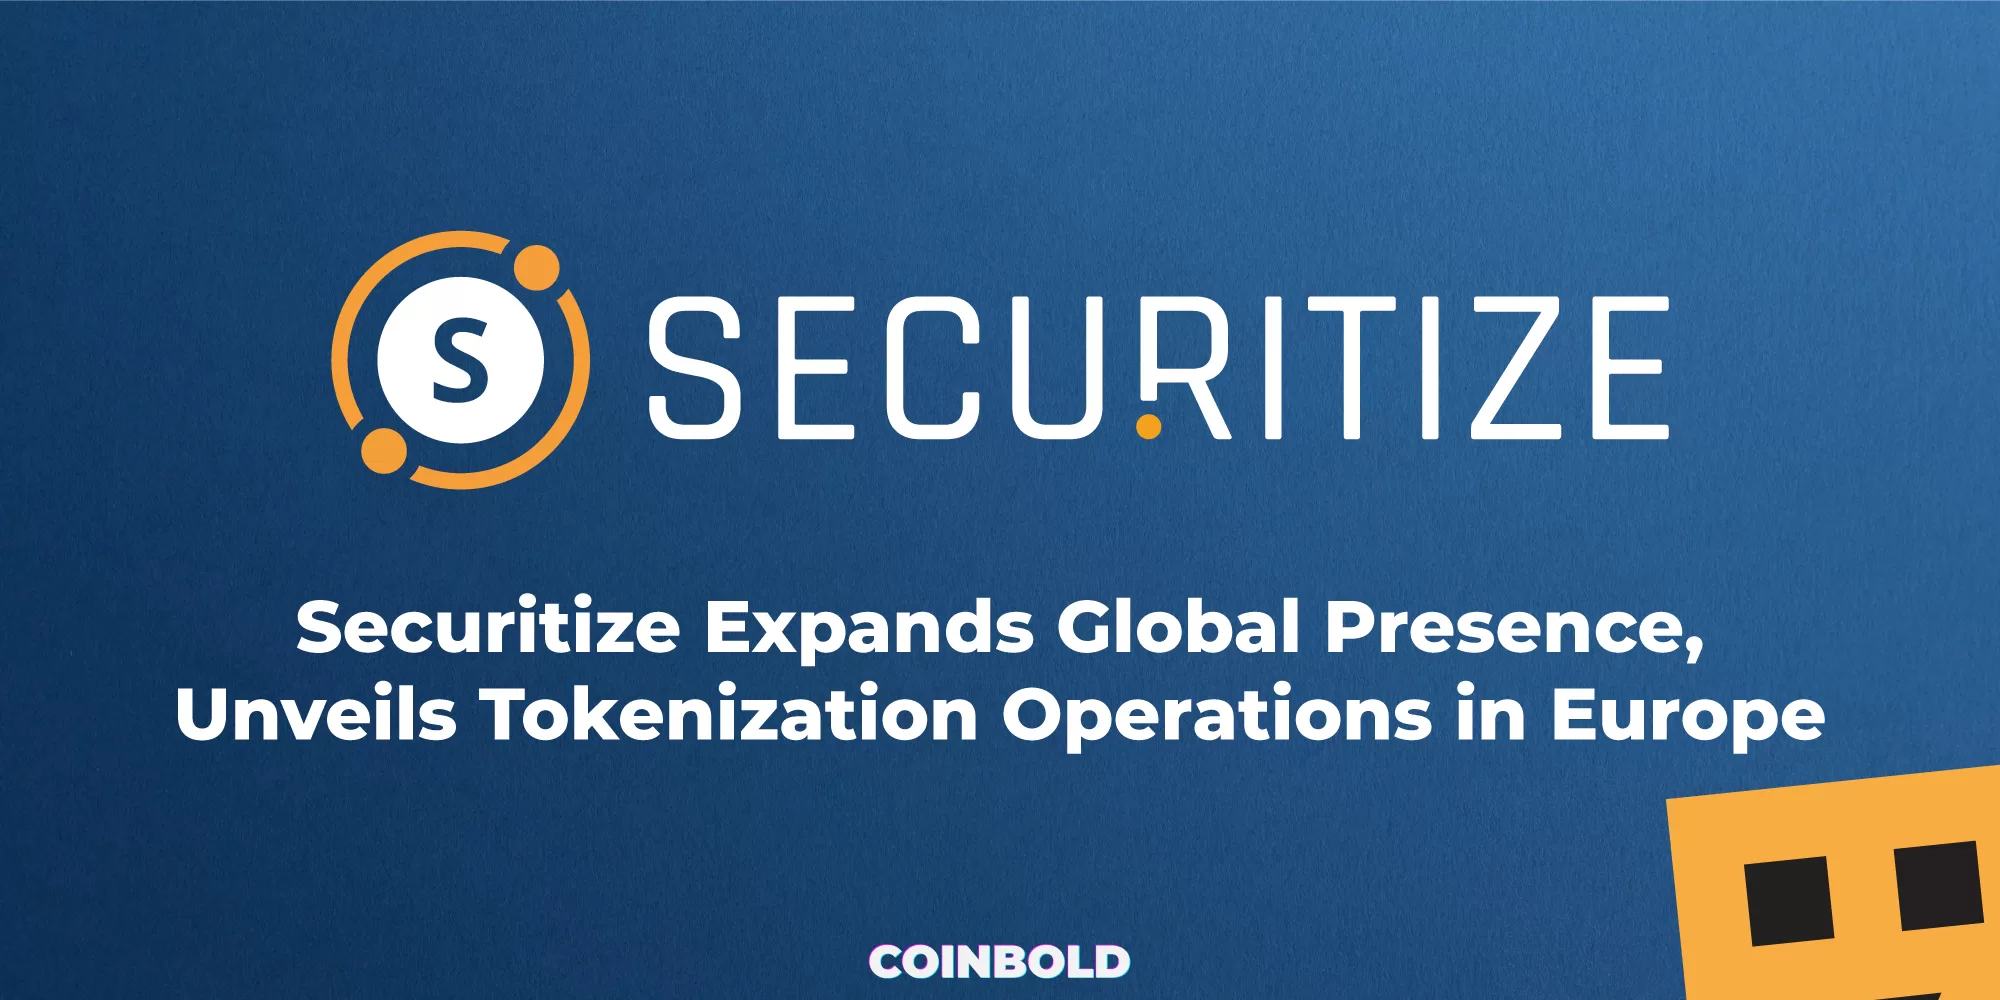 Securitize Expands Global Presence, Unveils Tokenization Operations in Europe